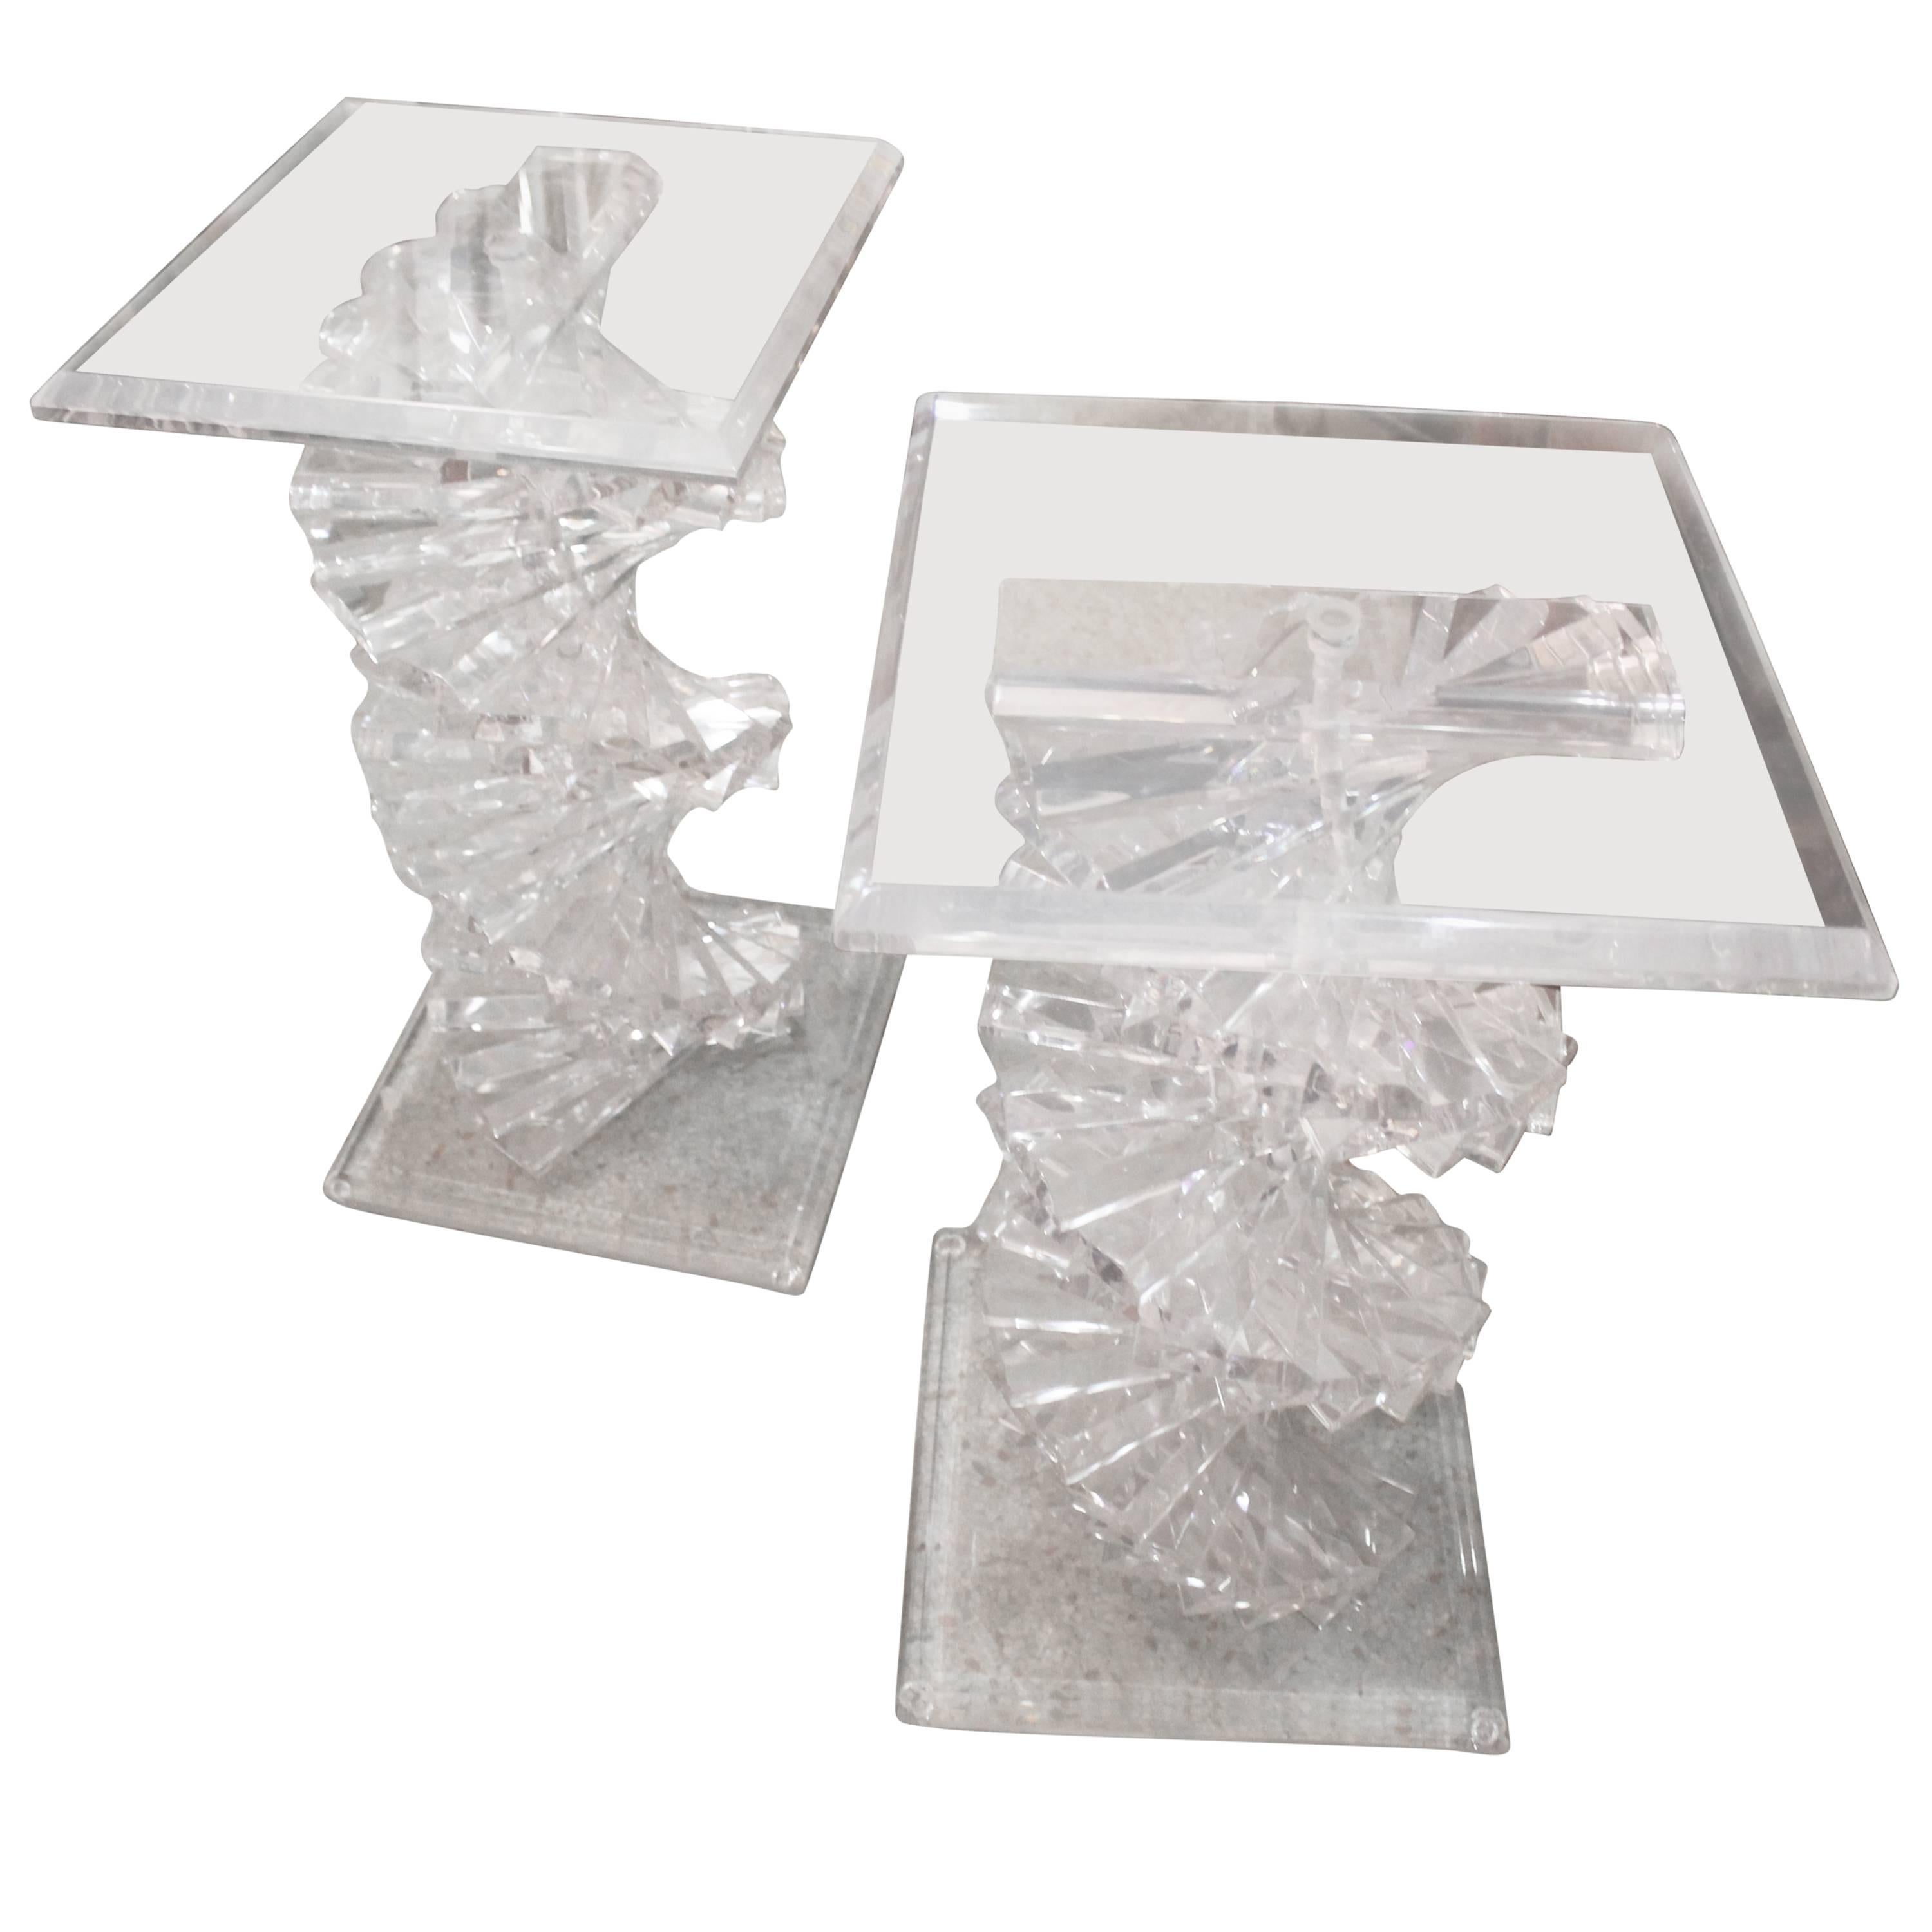 Pair DNA Spiral Lucite Dining Table Desk Console Bases Pedestals Staircase